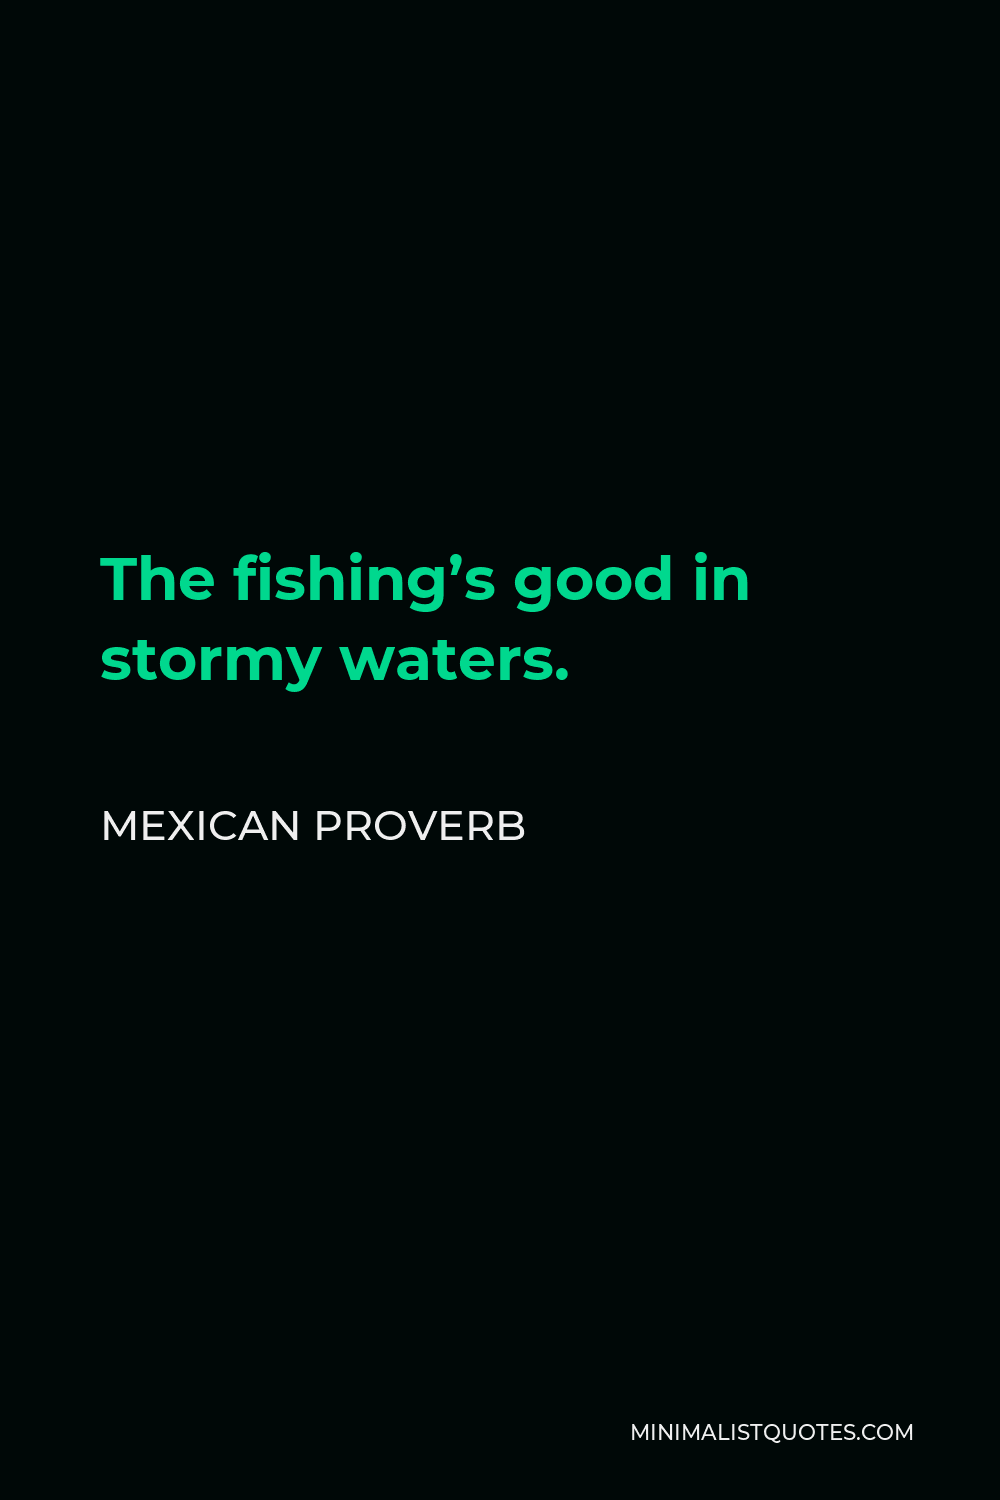 Mexican Proverb Quote - The fishing’s good in stormy waters.